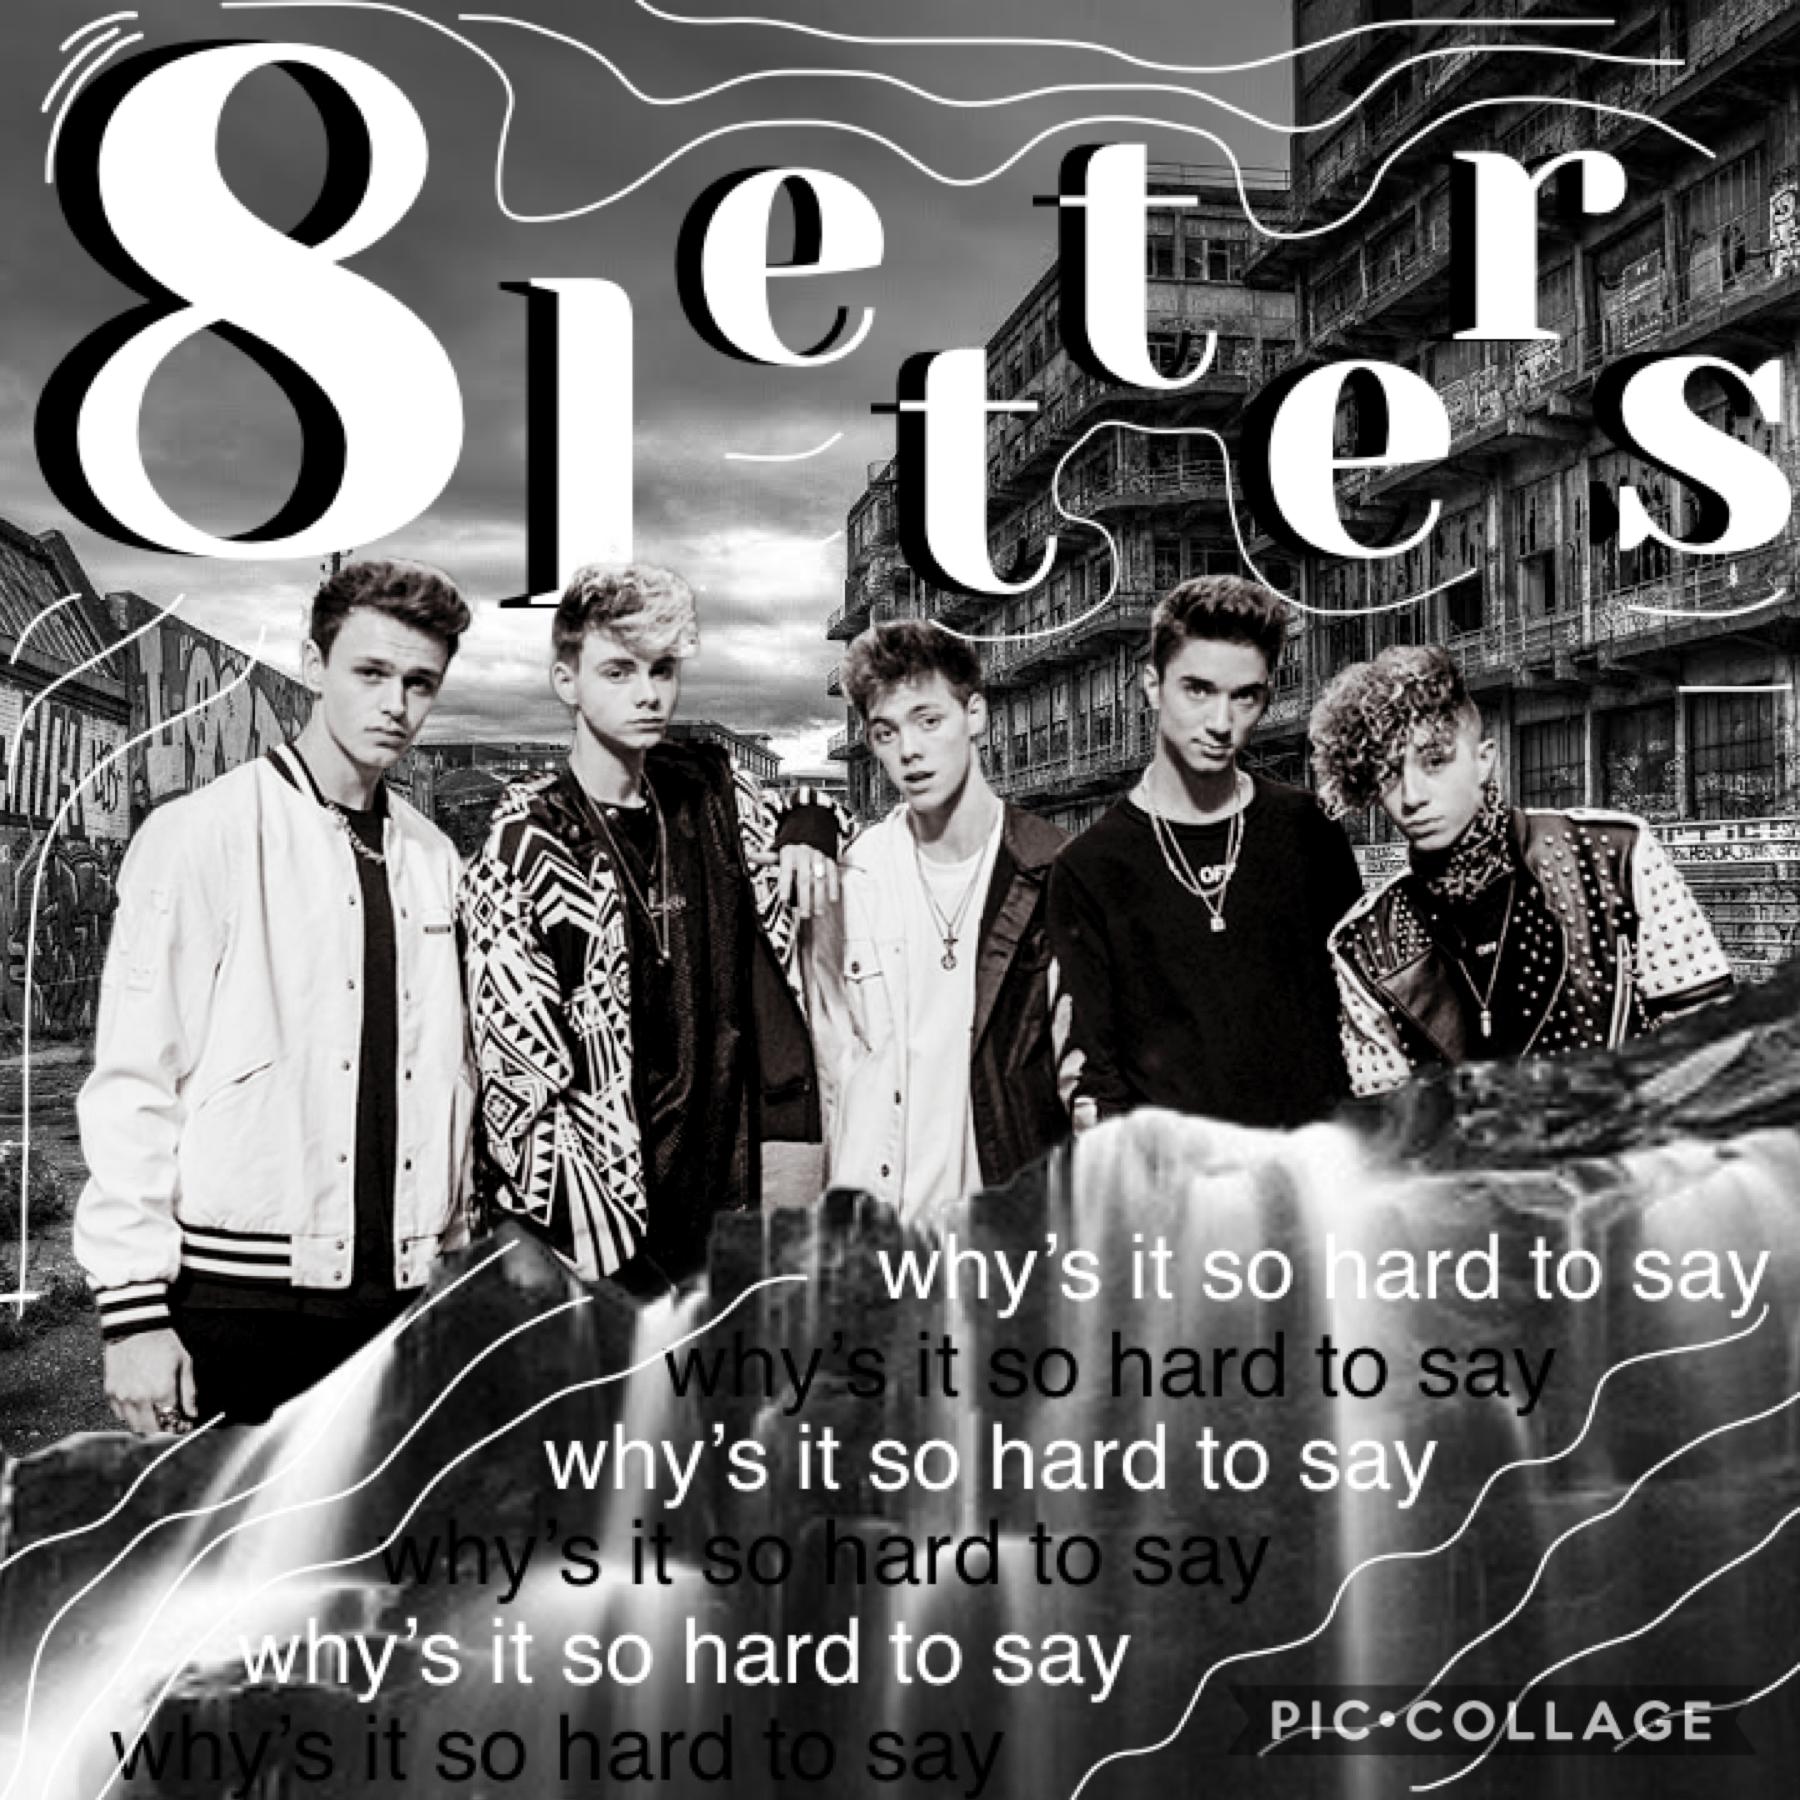 i don’t like this at all and i really don’t want to post this😂
so like how are youuu
8 letters is amazinggg
woohoo another why don’t we post
comment ur fav emoji 
😎🥺😳
big plans and chills by why don’t we are bopsss, highly recommend all of their music 